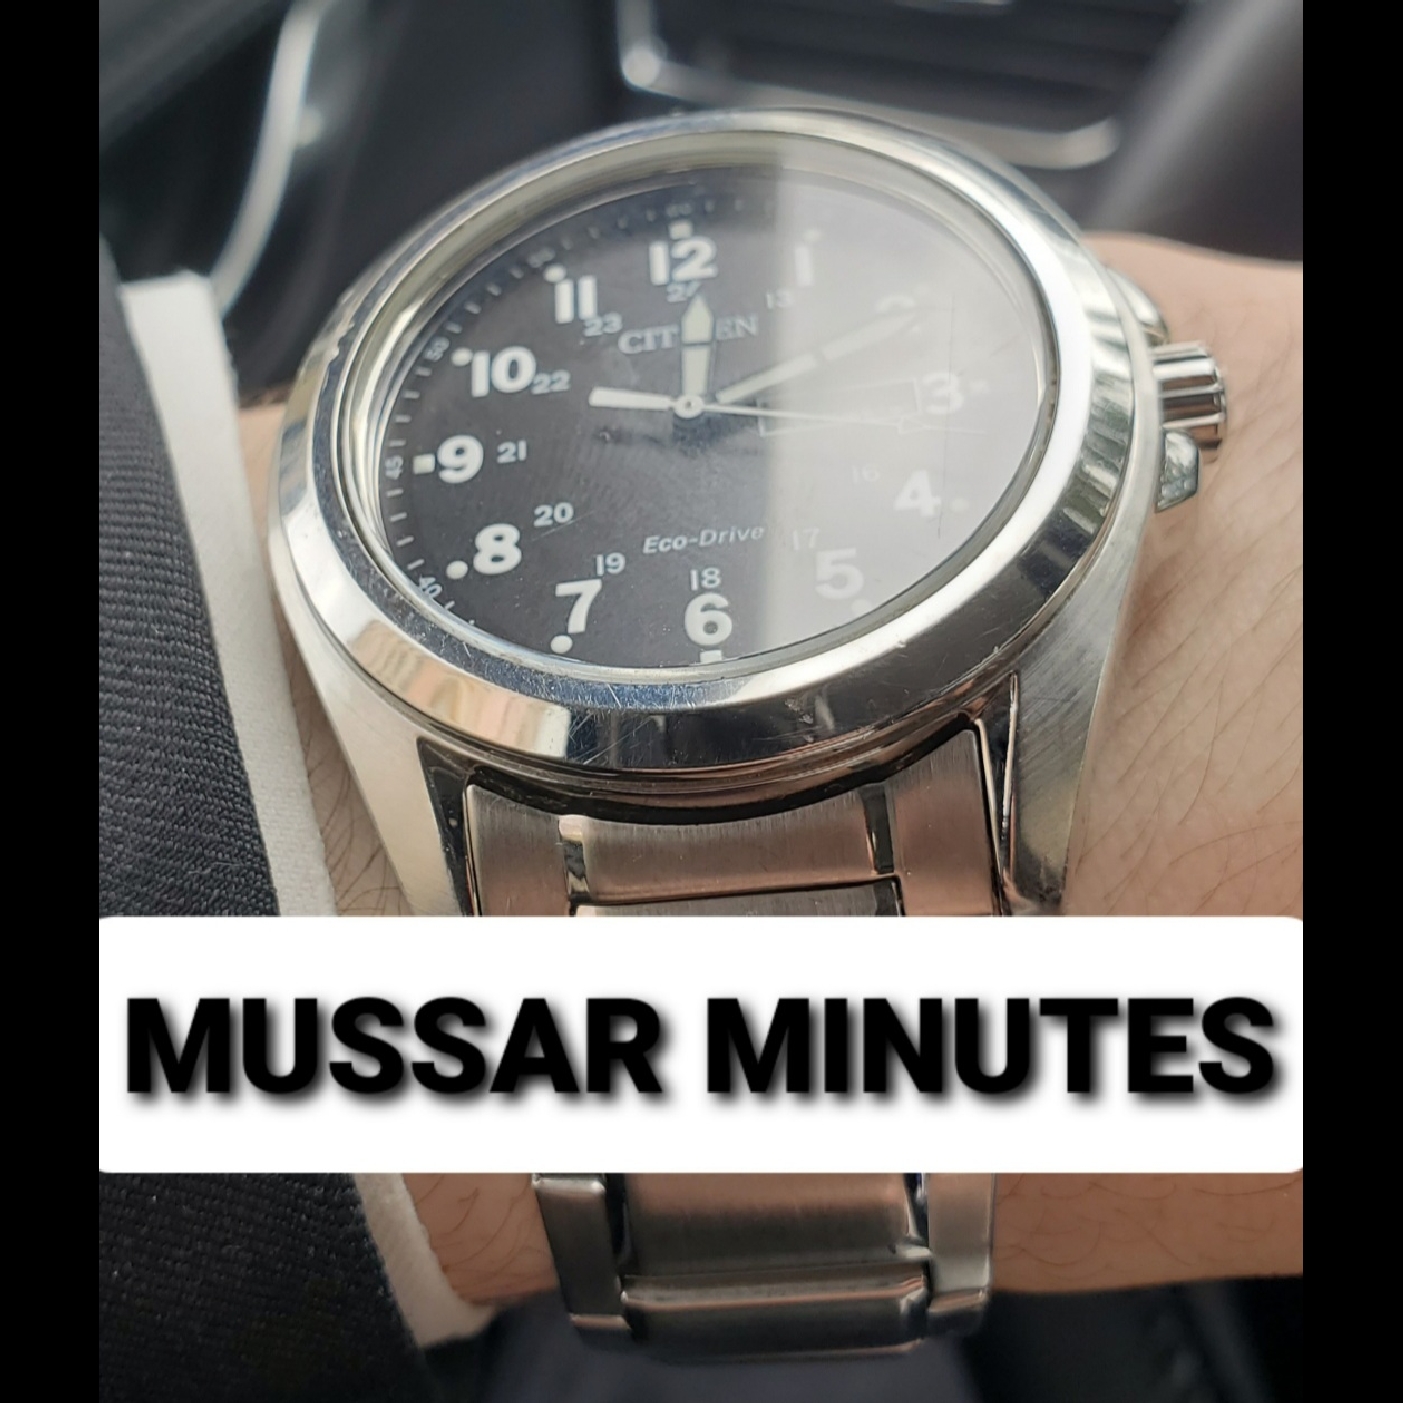 Mussar Minutes - Vayeishev: I'm Right & You're Wrong 🥳